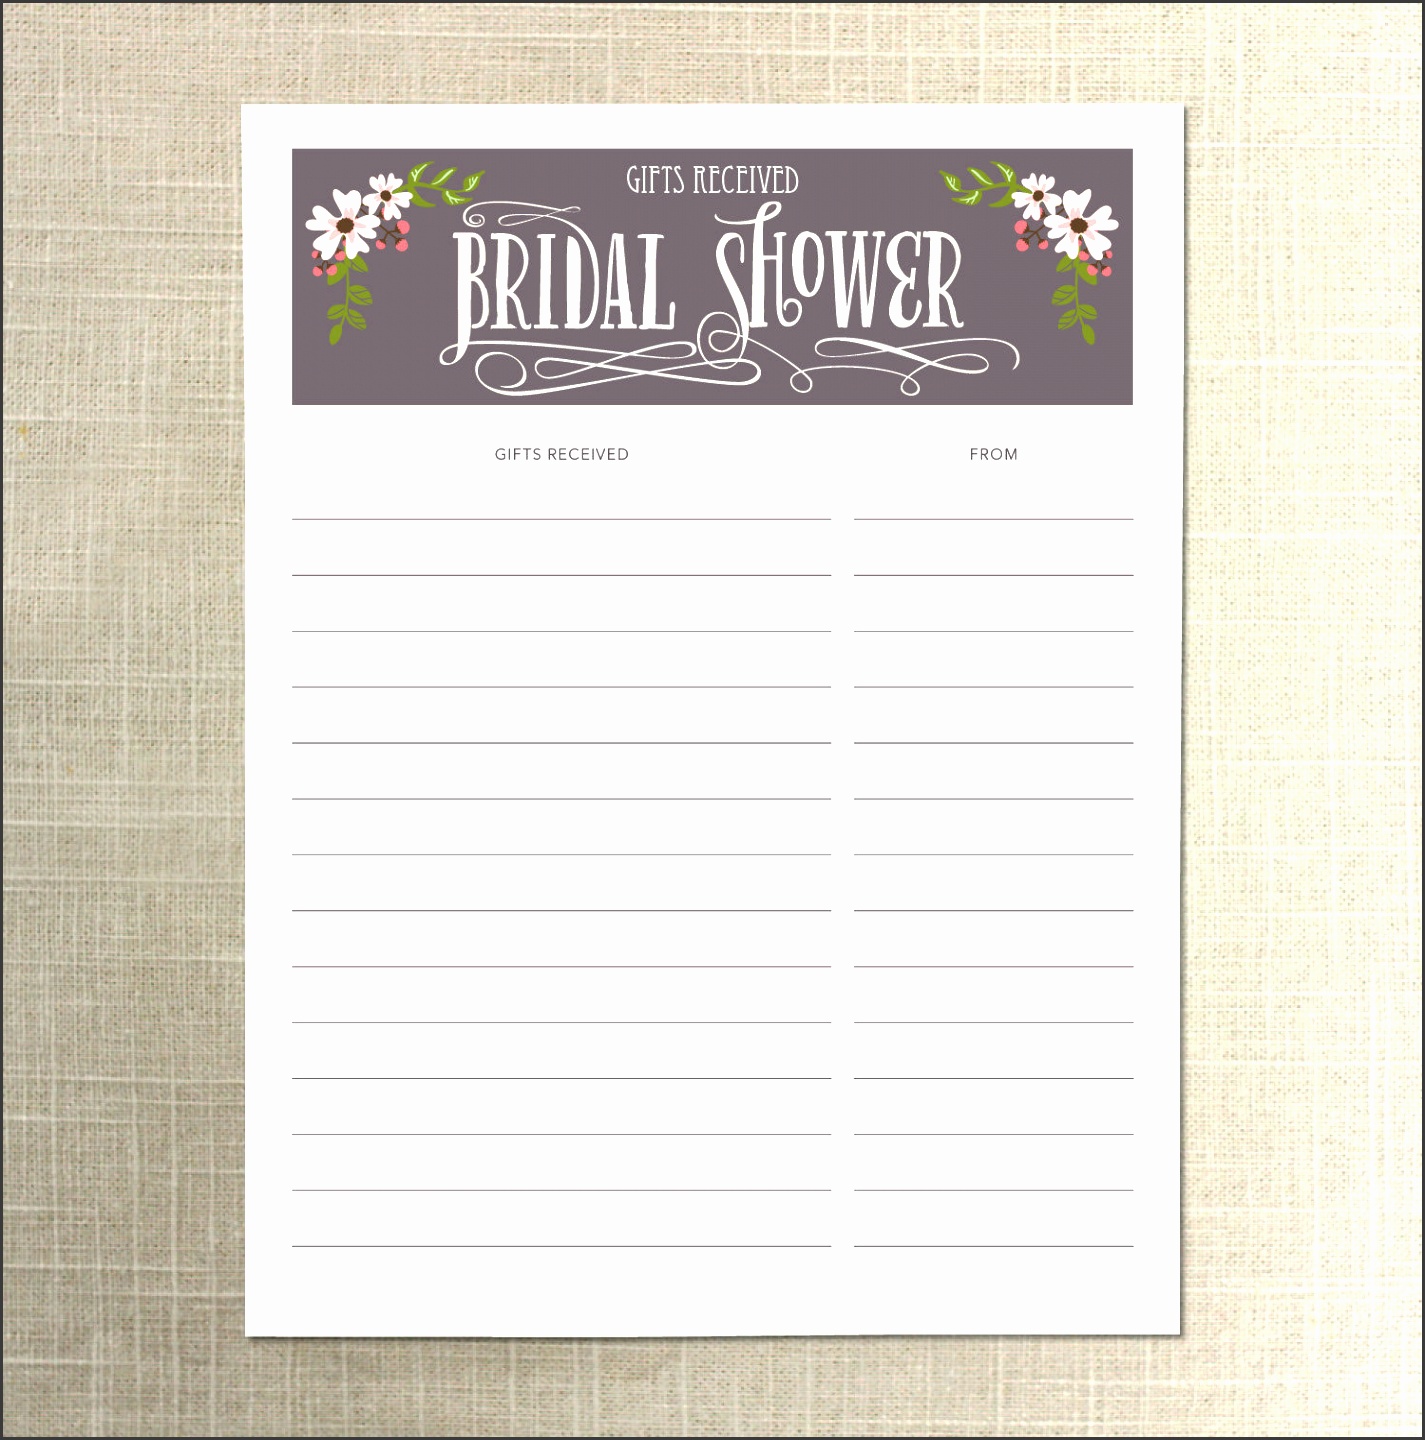 bridal shower to do list template il fullxfull bridal shower to do list template printable wedding guest list template printable wedding guest list template